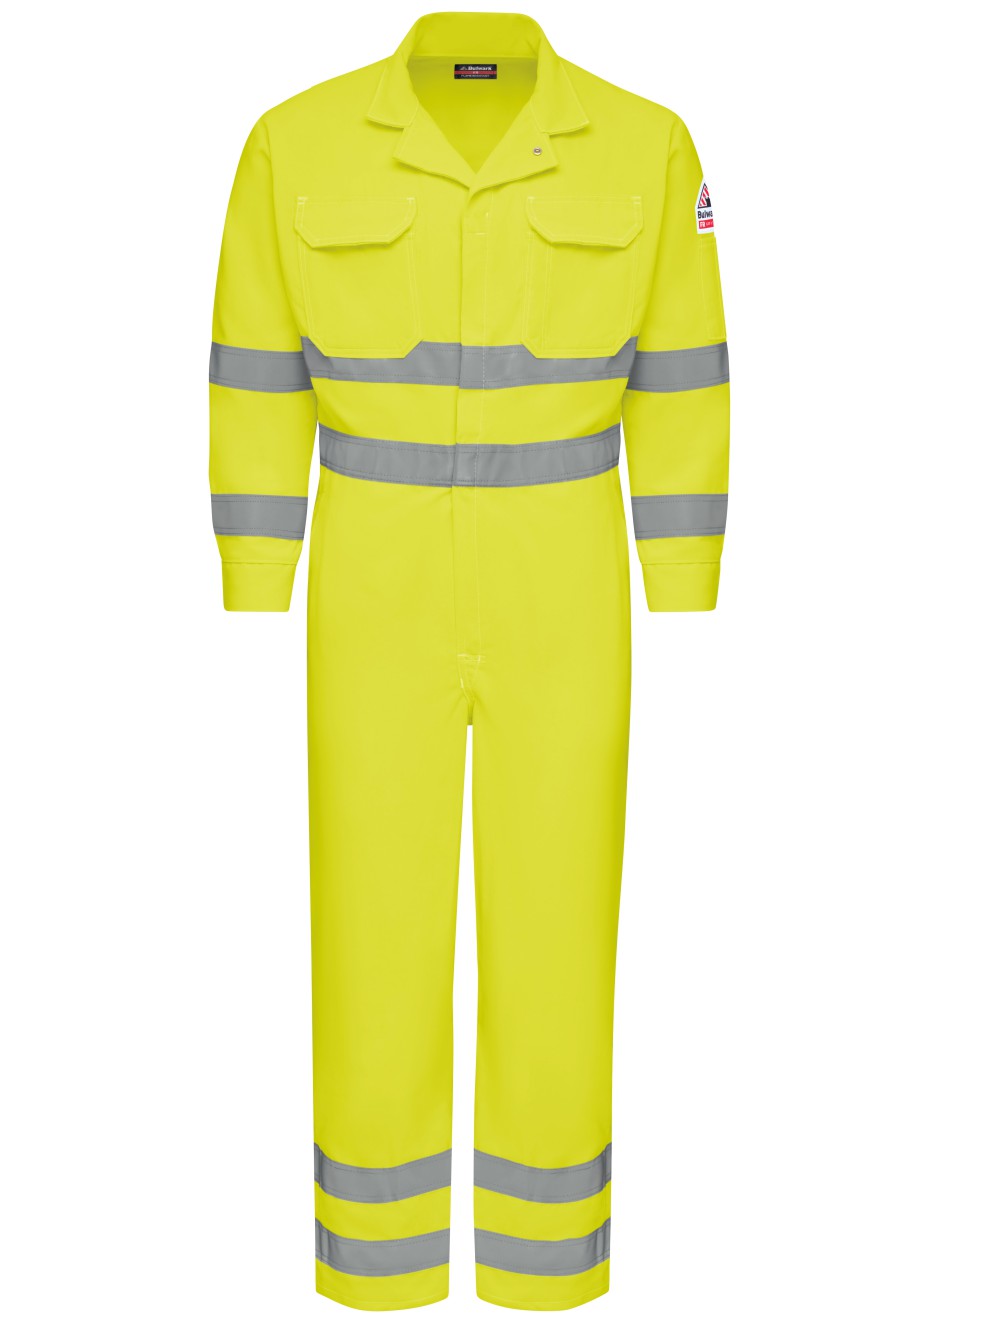 Men's Lightweight FR Hi-Visibility Deluxe Coverall with Reflective Trim ...